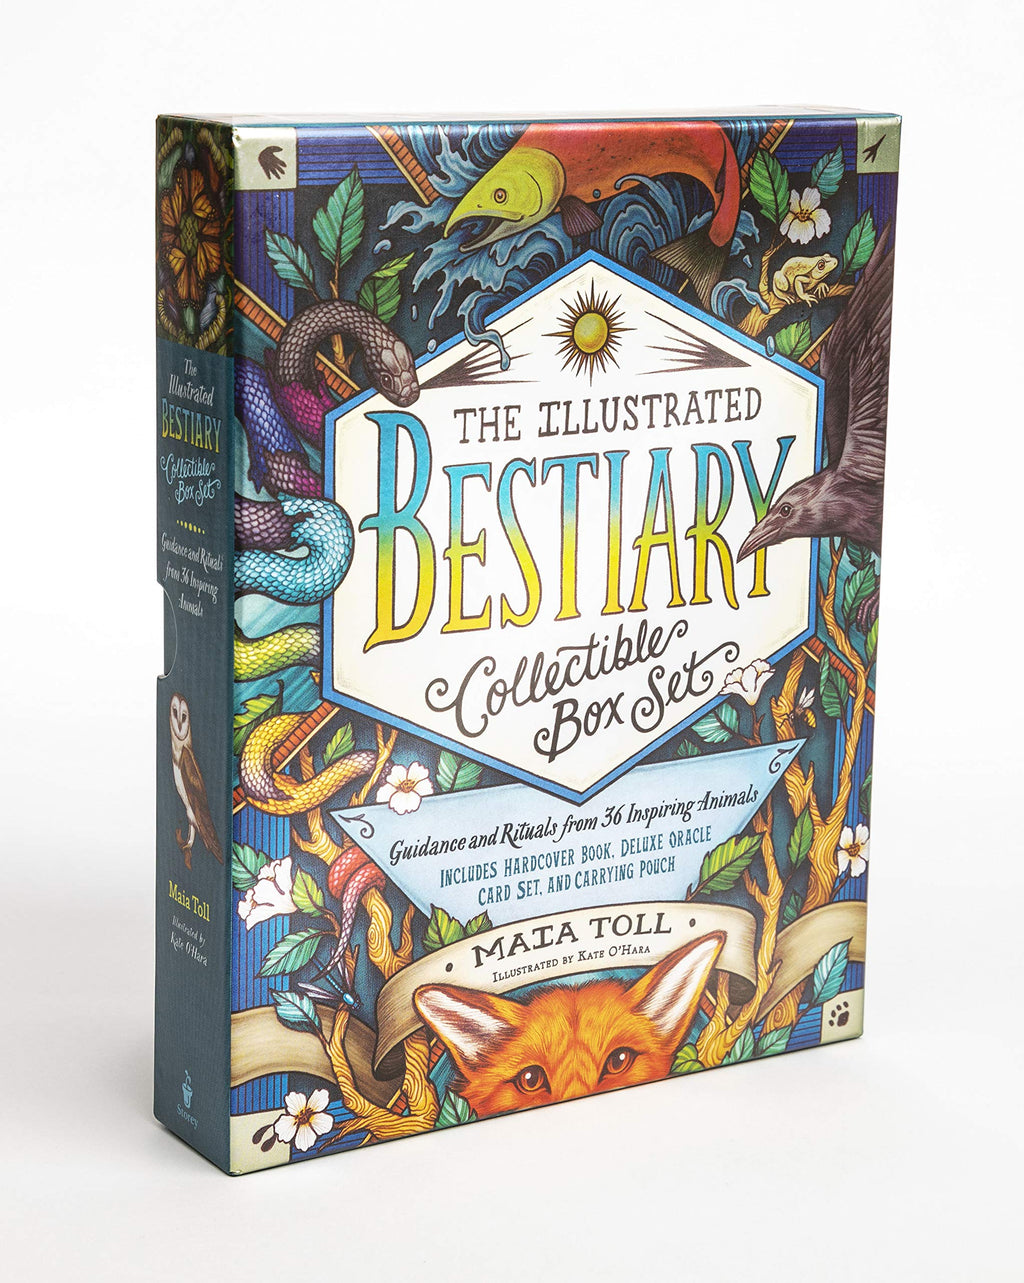 Illustrated Bestiary Collectible Box Set by Maia Toll